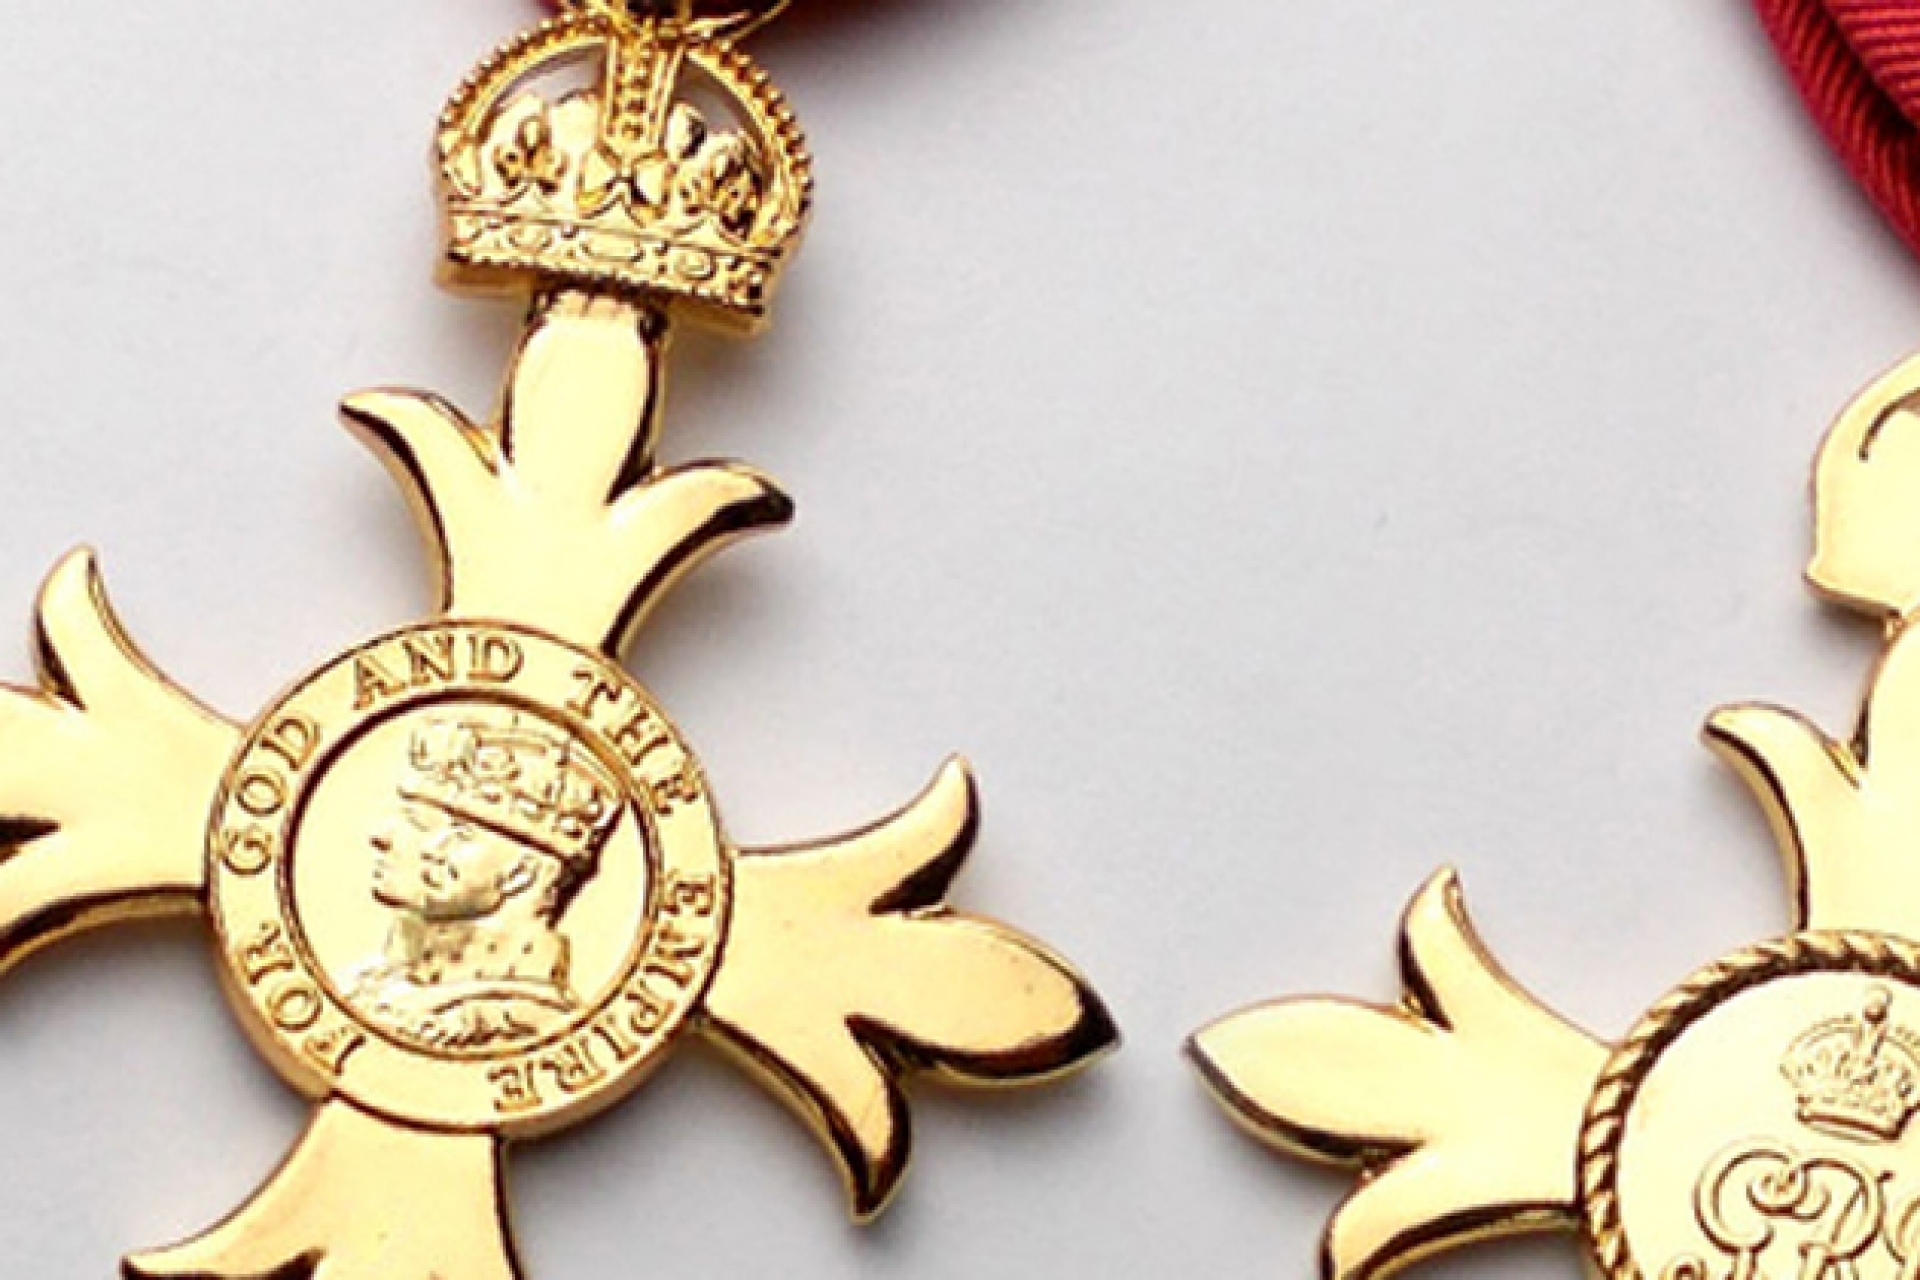 Authors and Industry Experts Named in King’s First Birthday Honours List.